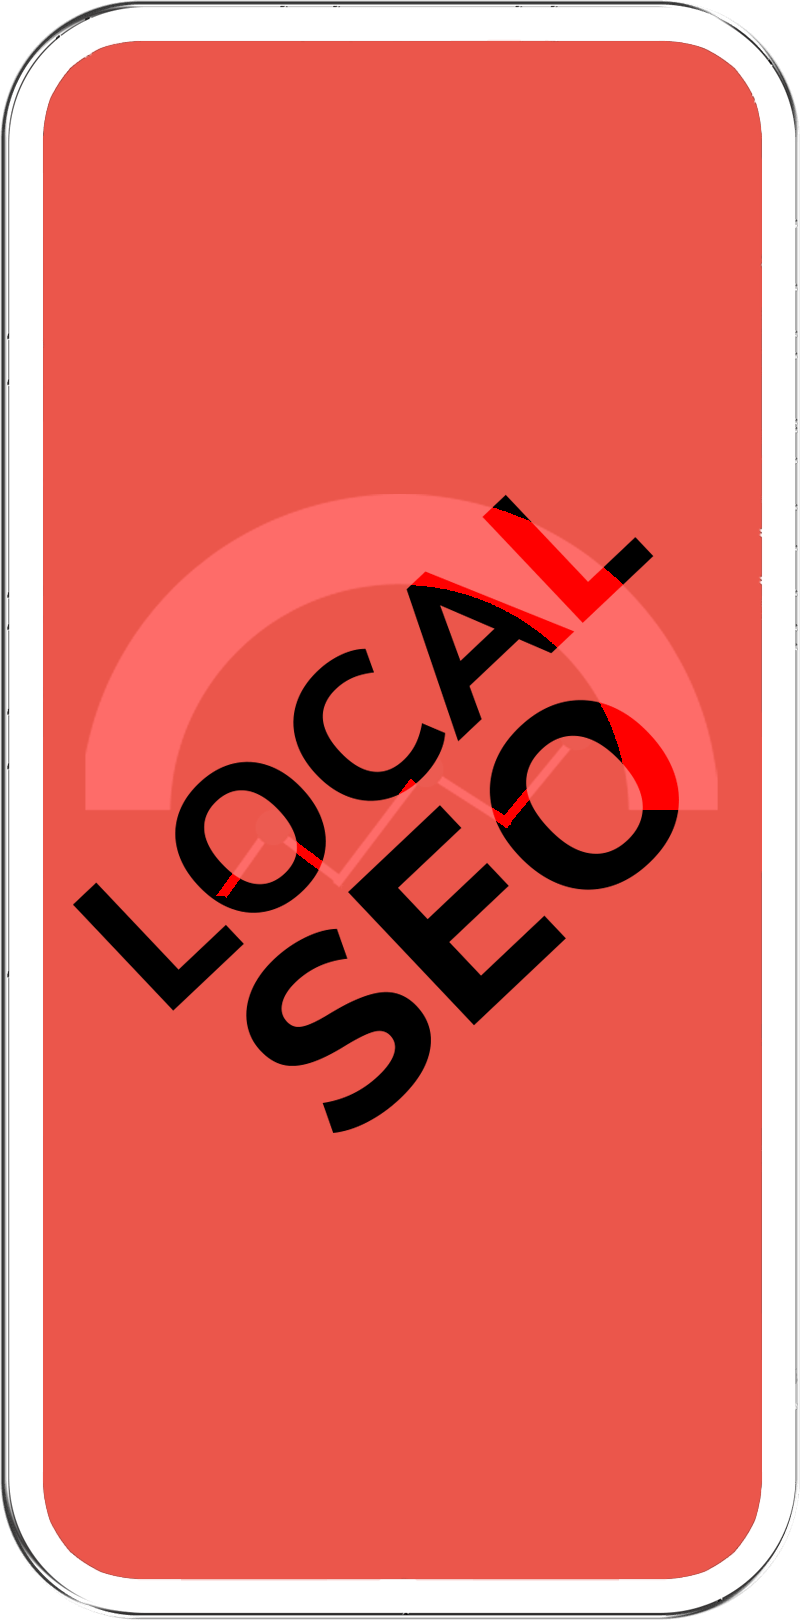 Local SEO for Business